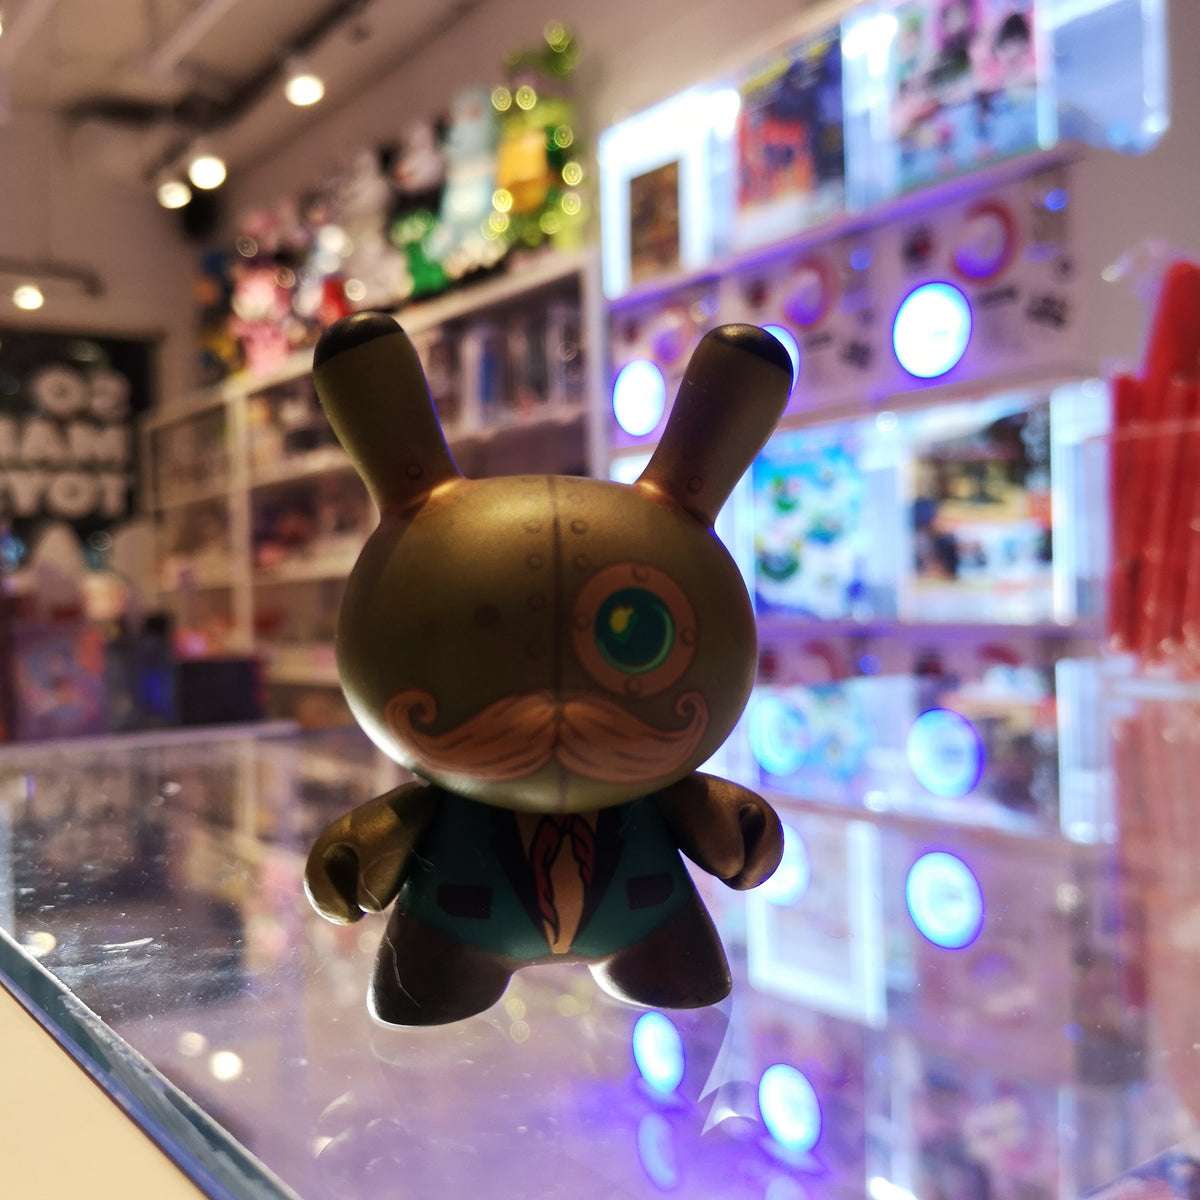 The Self-Stoking Flunky Engine - Dunny 2010 series by Kidrobot